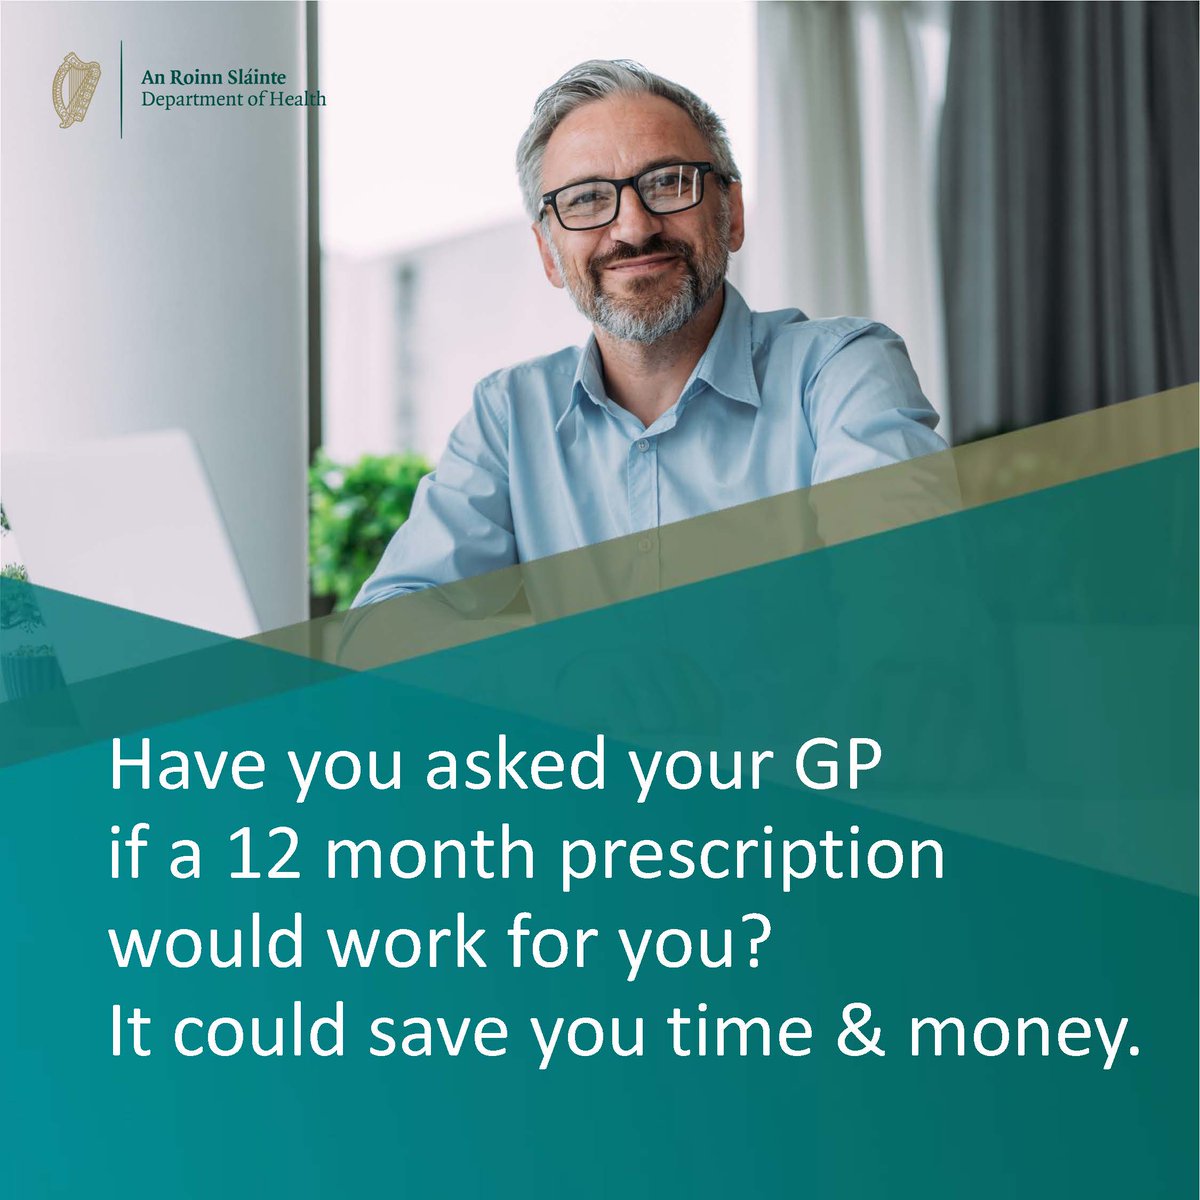 Are you taking long term medication? A 12 month prescription may suit you depending on your health & medication. Find out more at gov.ie/12monthprescri… #GP #Pharmacist